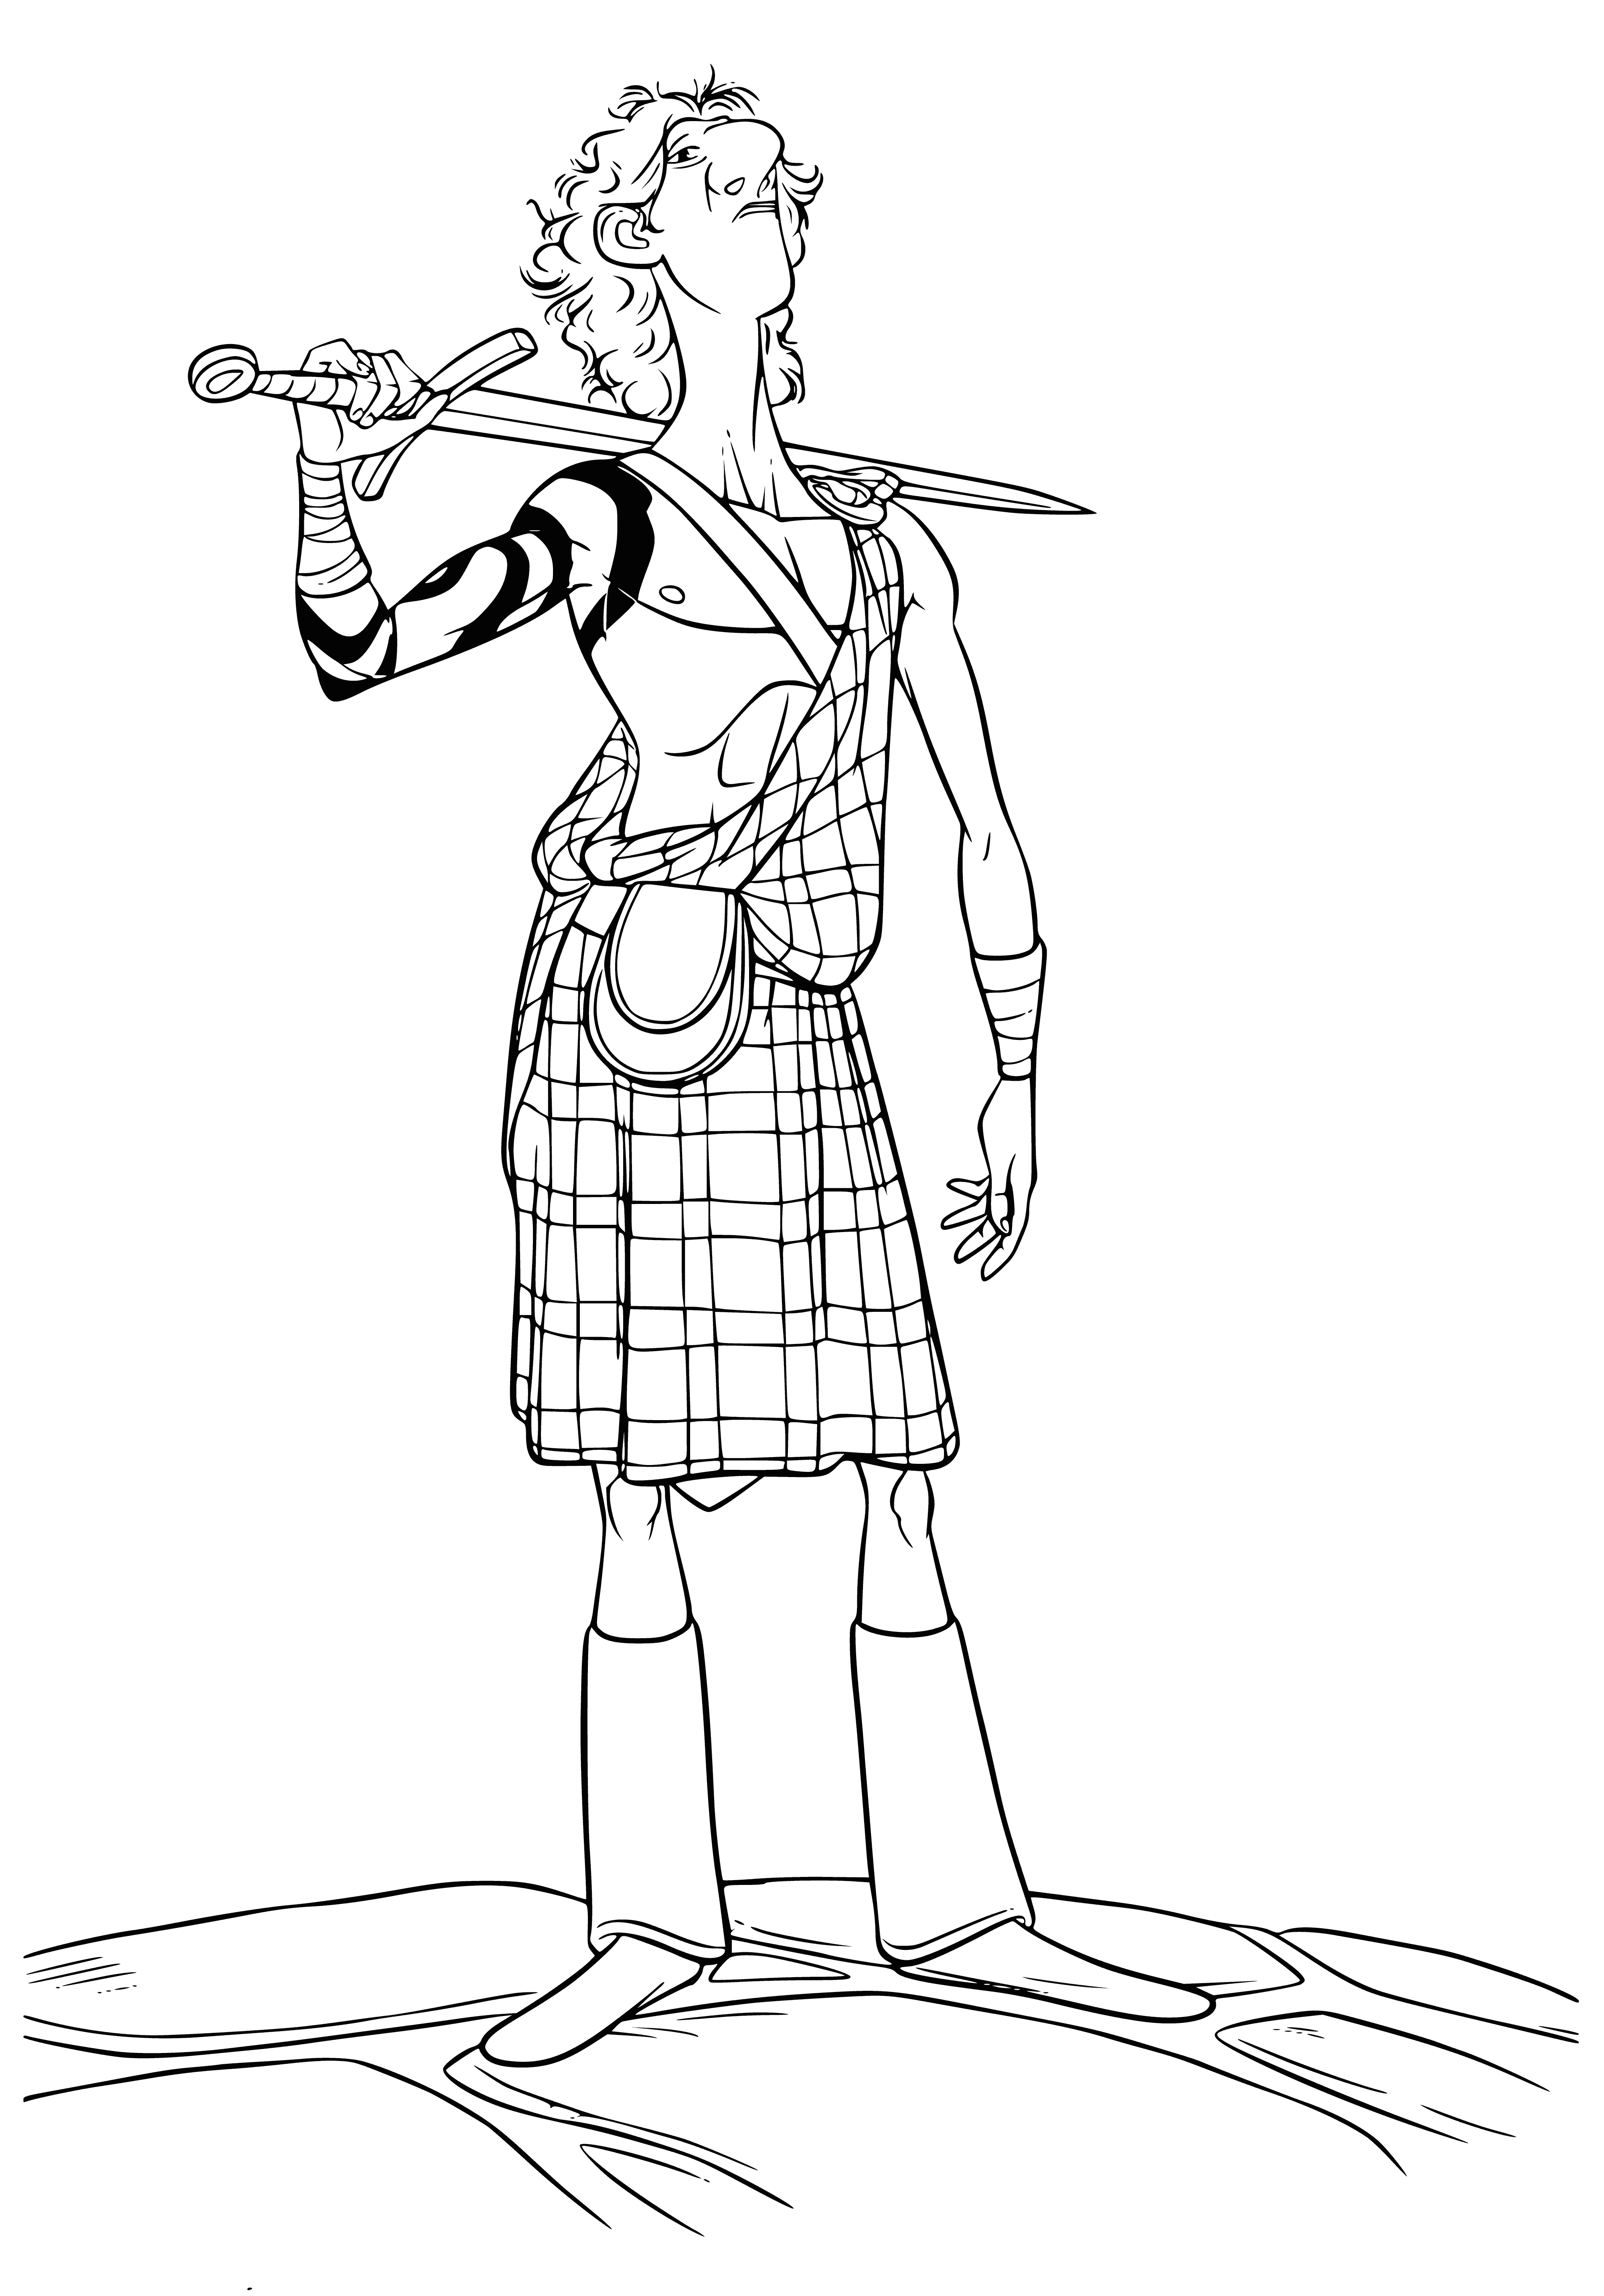 coloring page: Young boy, age 7 or 8, in blue & white kilt, sits astride large gray horse, right hand gripping broadsword, looking determined.